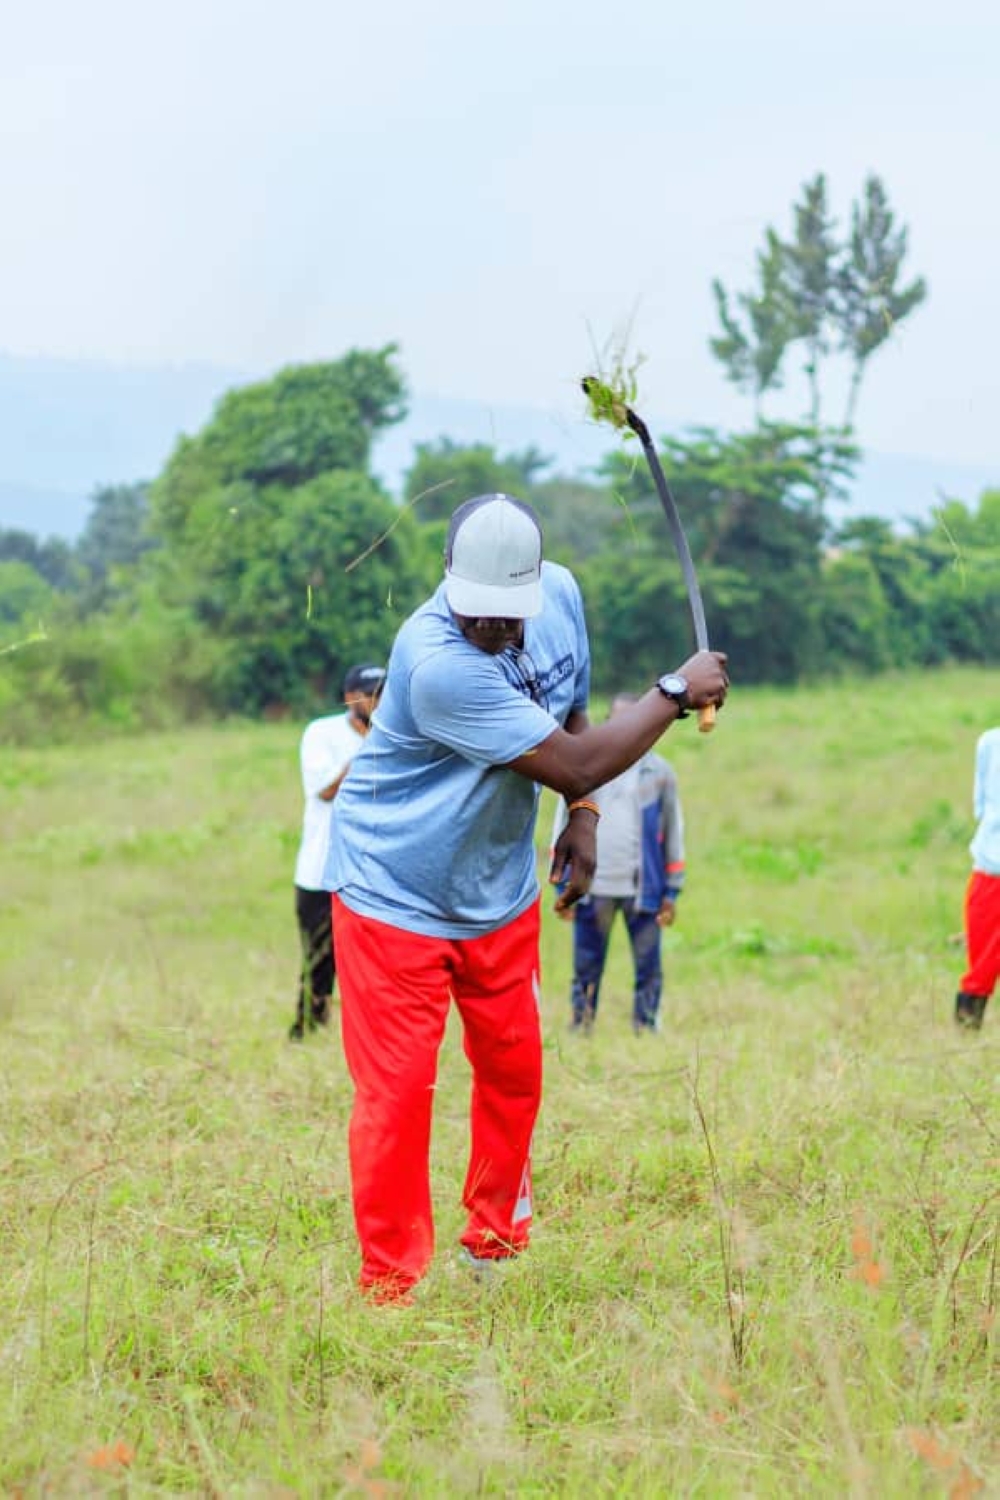 Karate coach James Opiyo joined residents of Niboyi Sector, in the monthly community work (Umuganda) and later in the afternoon conducted his last session of the two-day seminar.